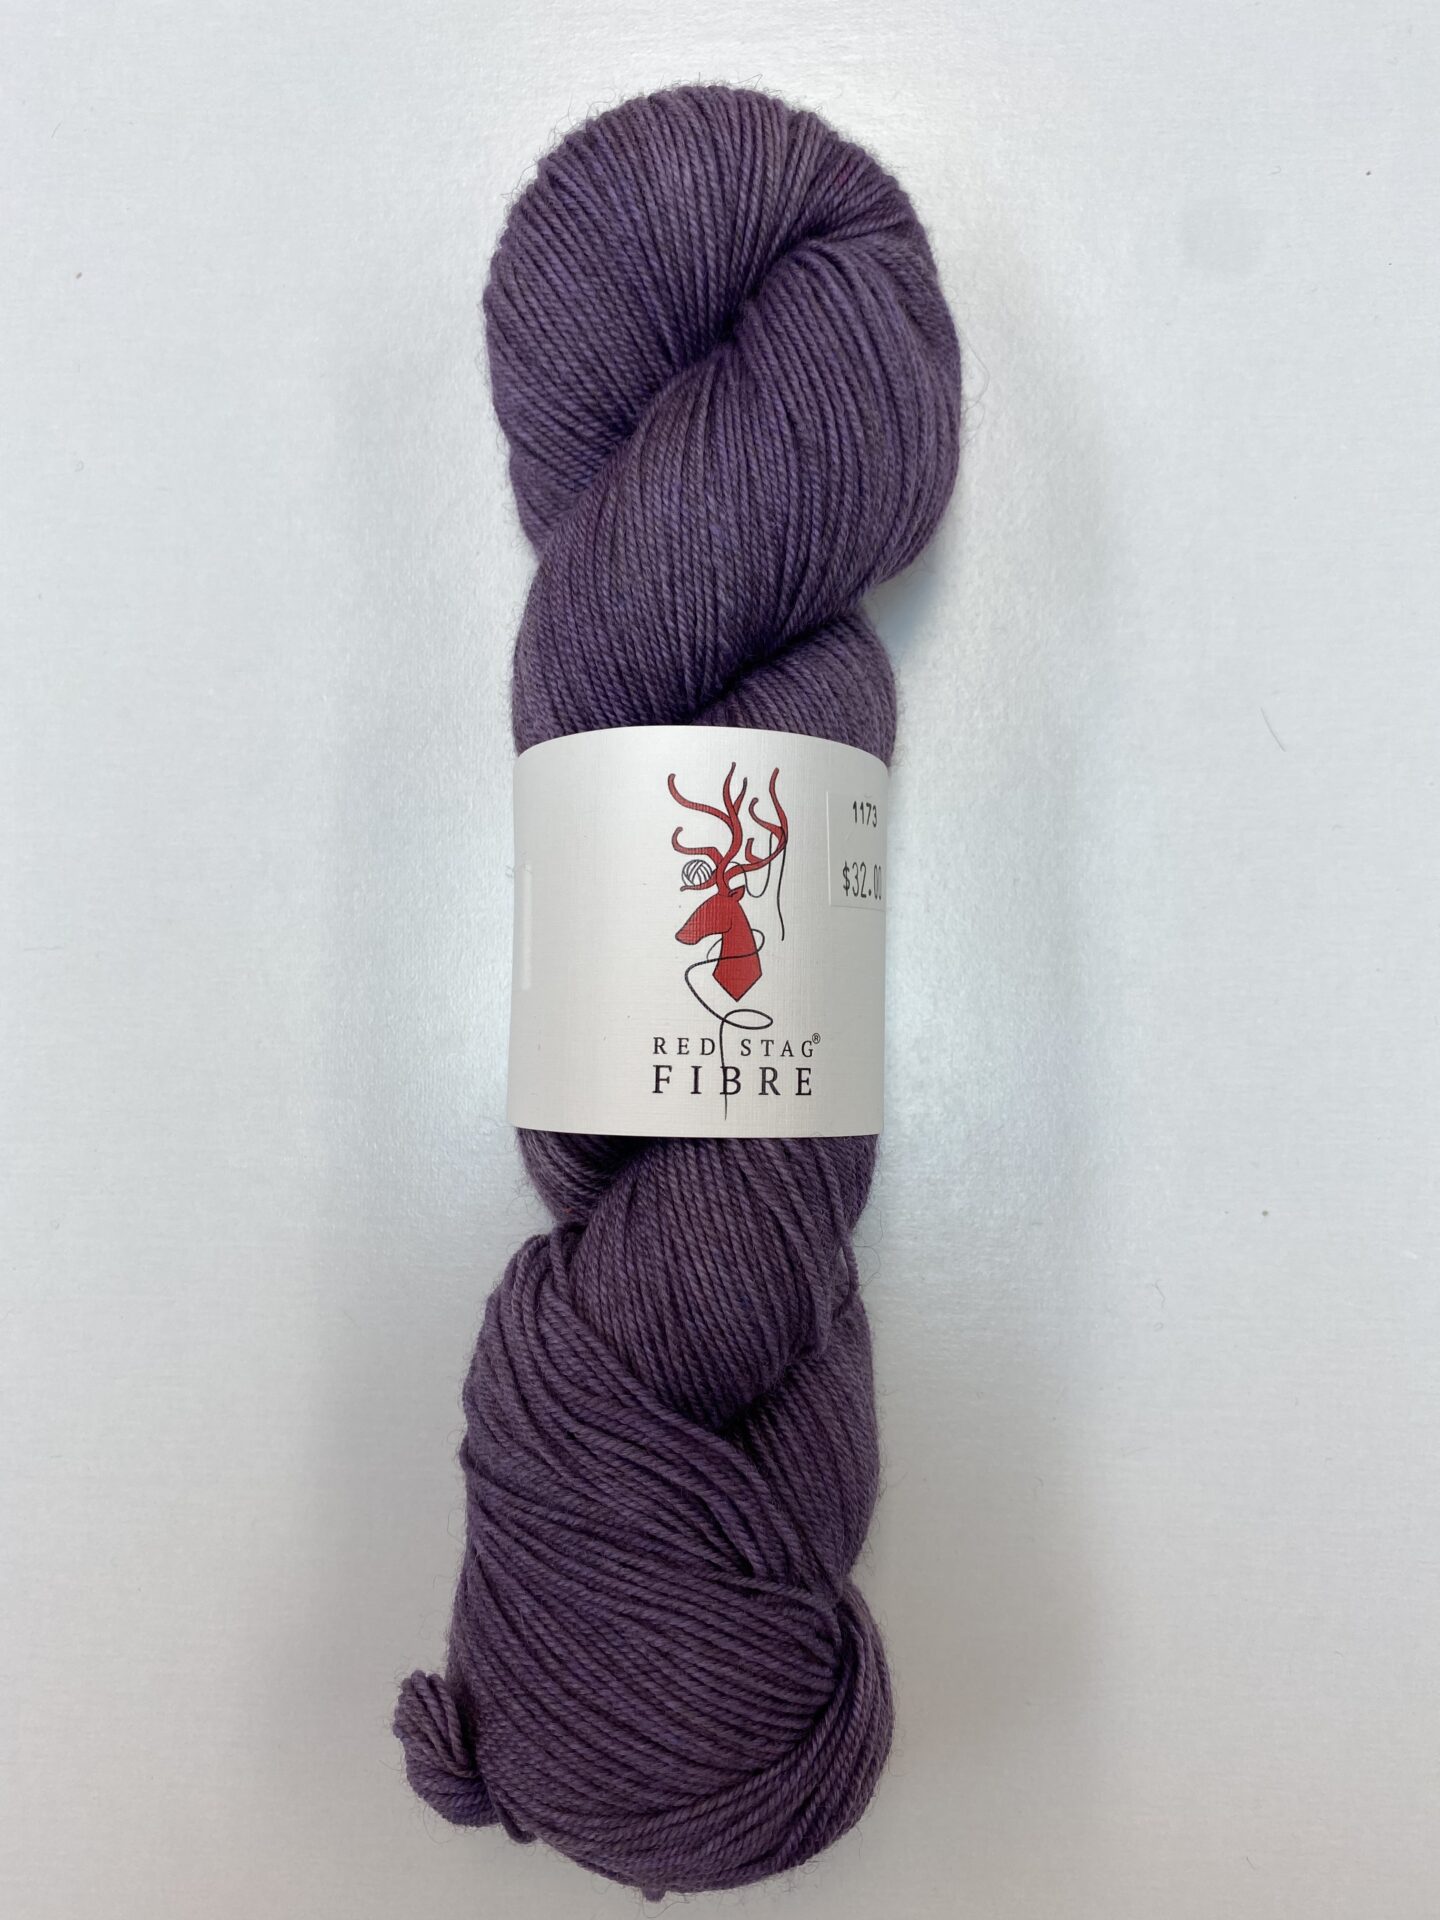 Violet Color Wool of the Finest Quality